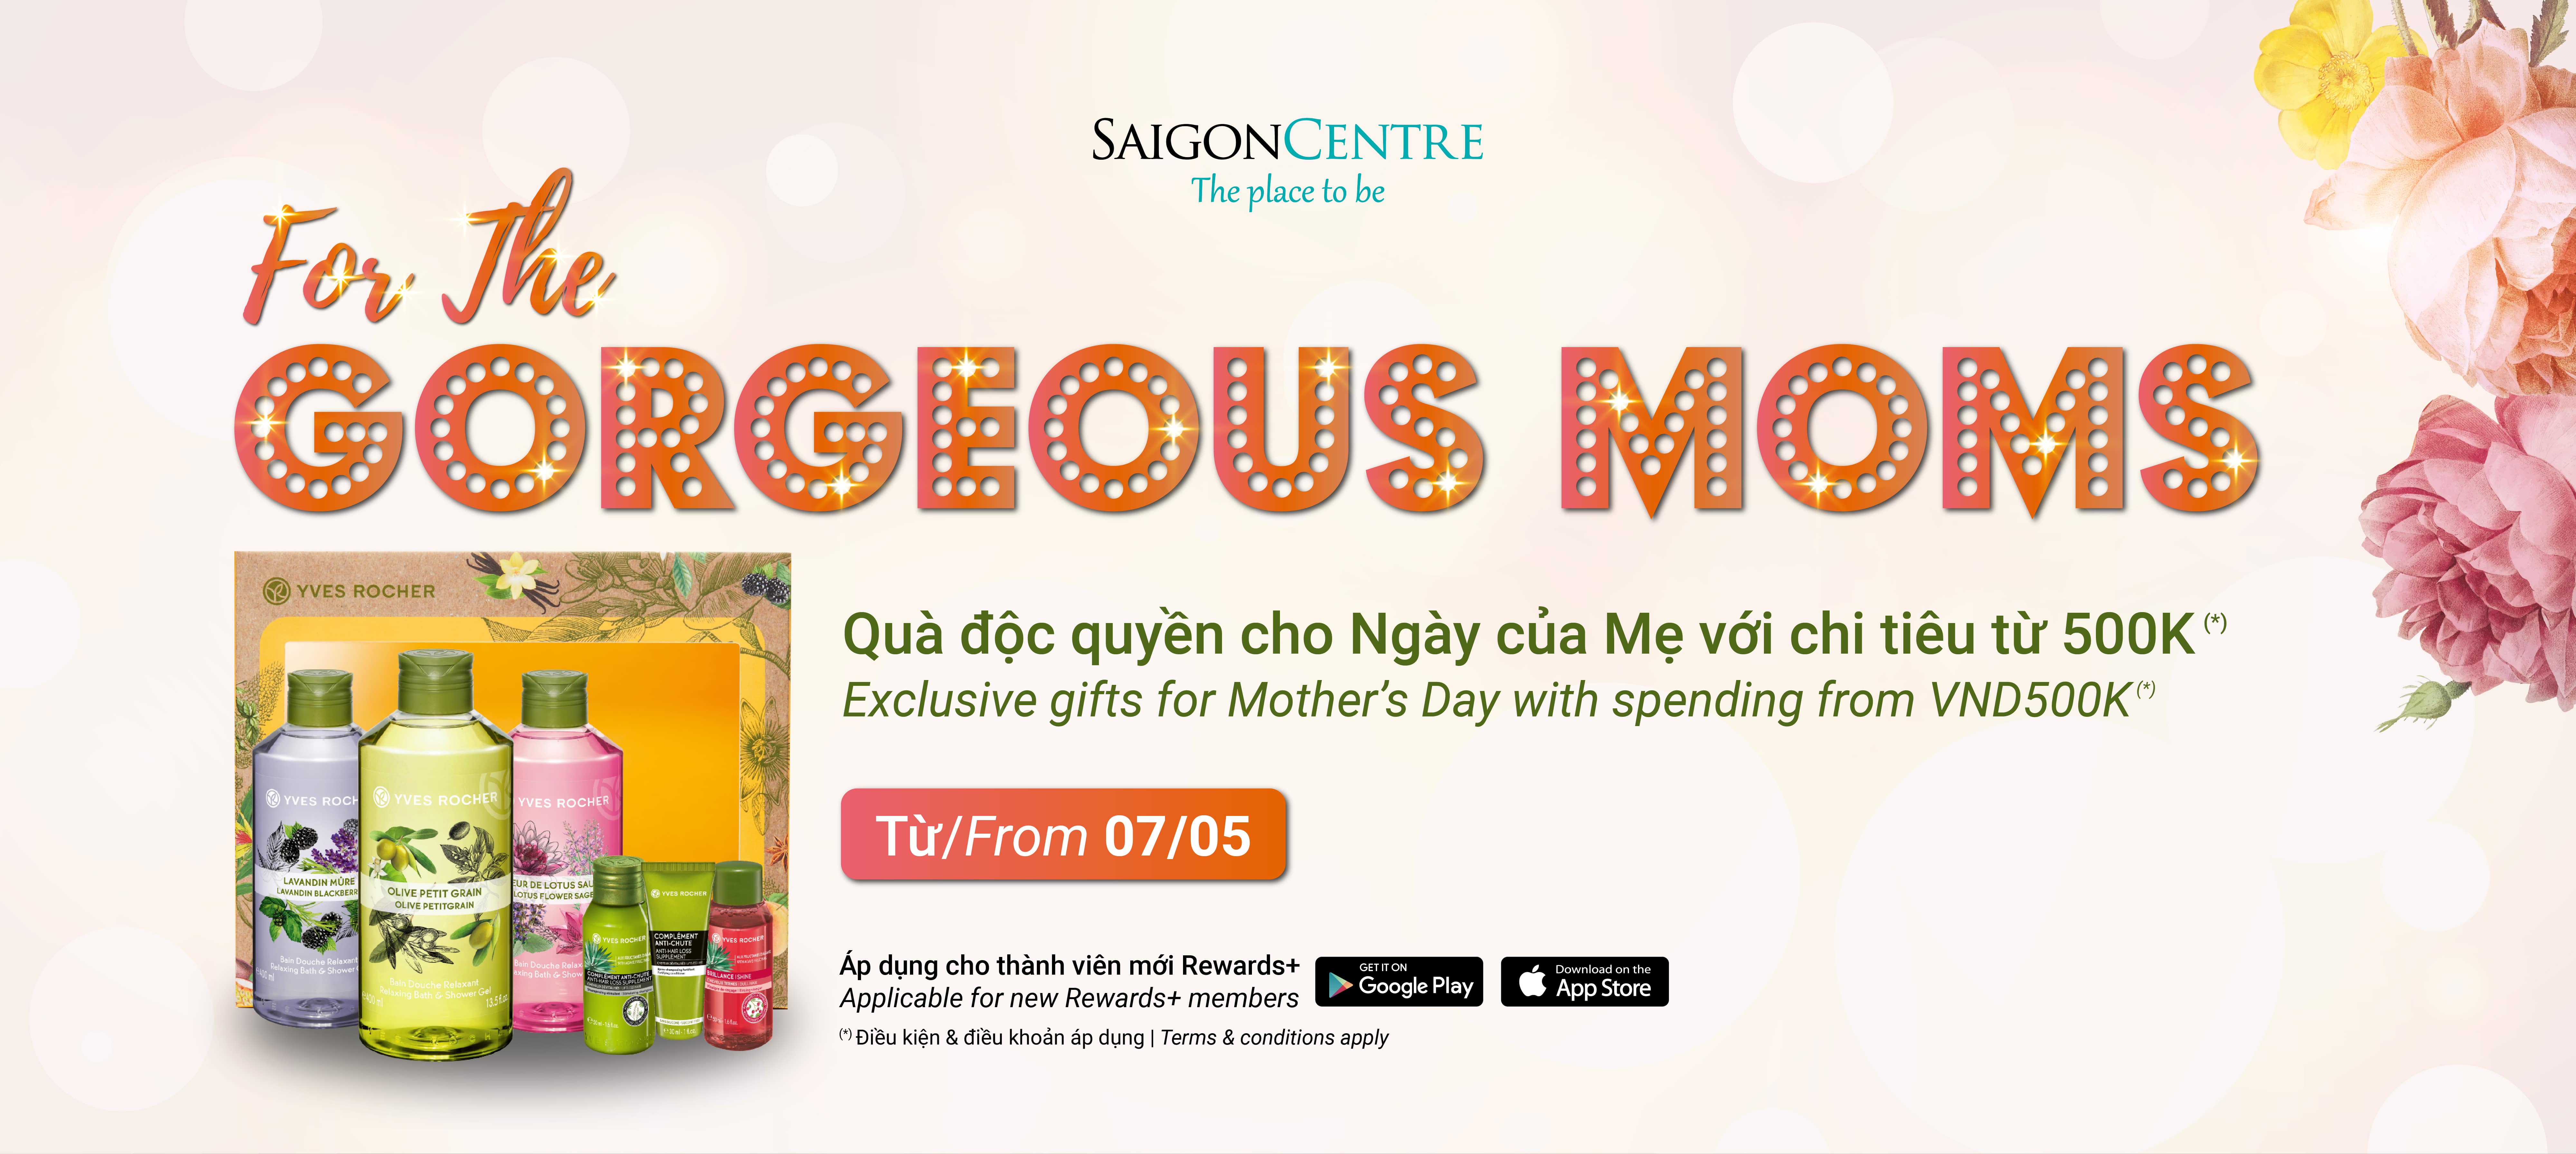 EXCLUSIVE GIFTS FOR MOTHER’S DAY